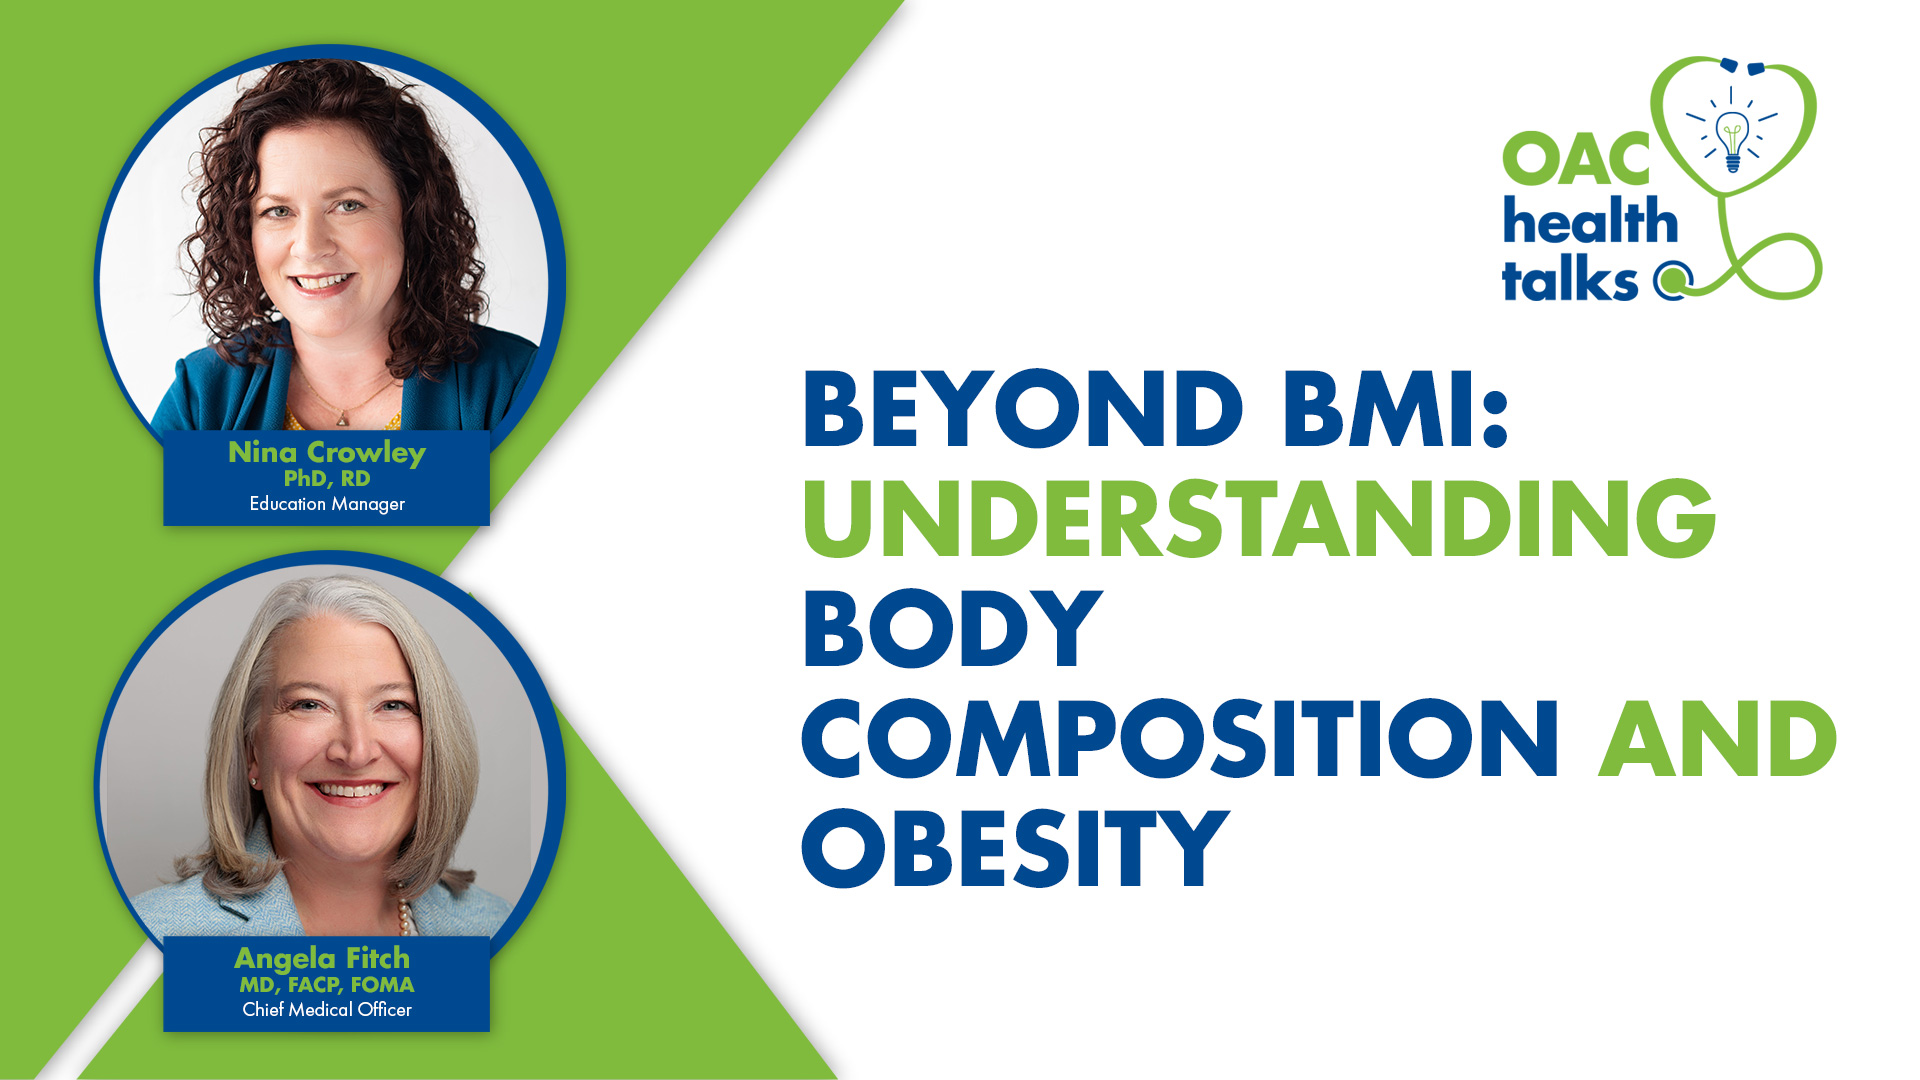 Beyond BMI: Understanding Body Composition and Obesity